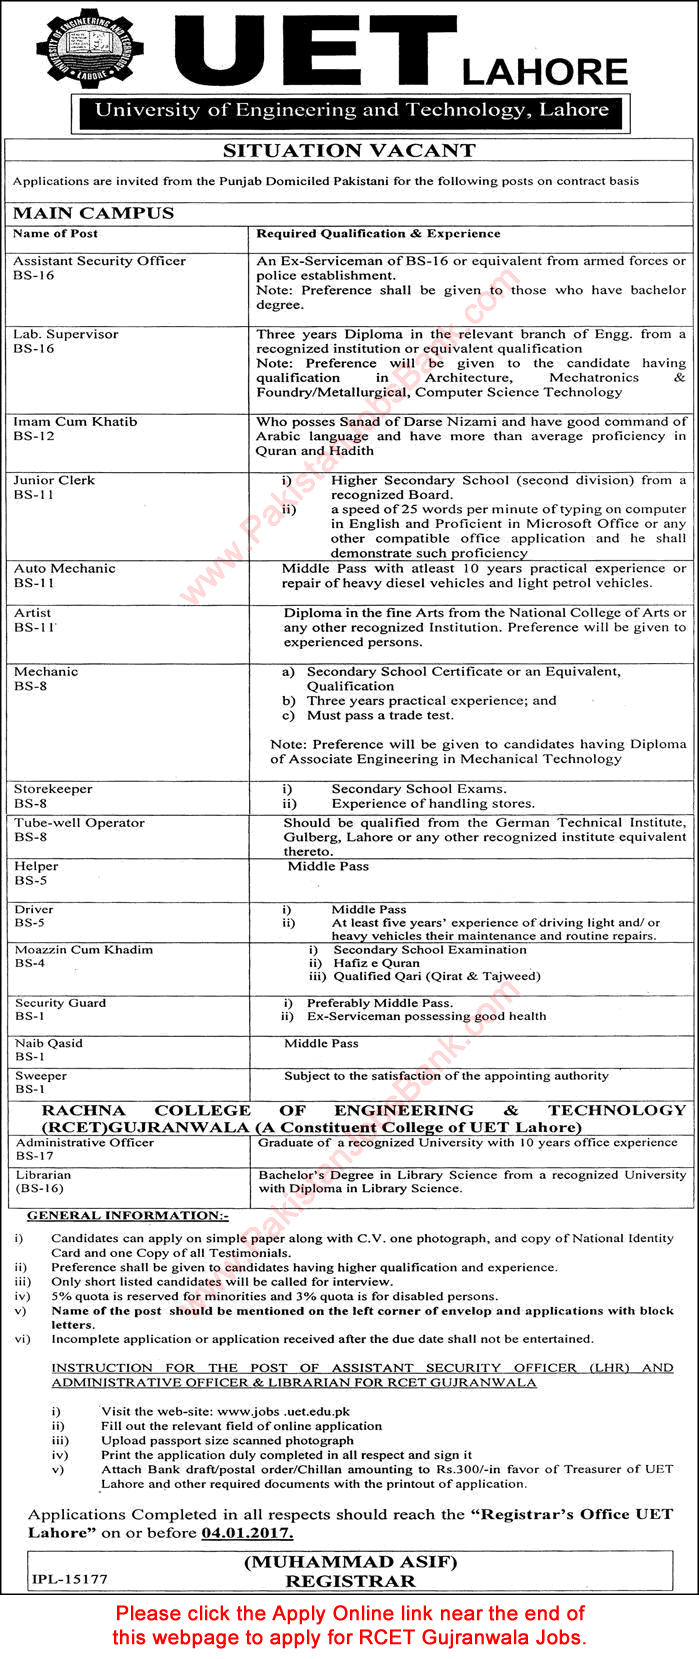 UET Lahore Jobs December 2016 University of Engineering and Technology Latest / New